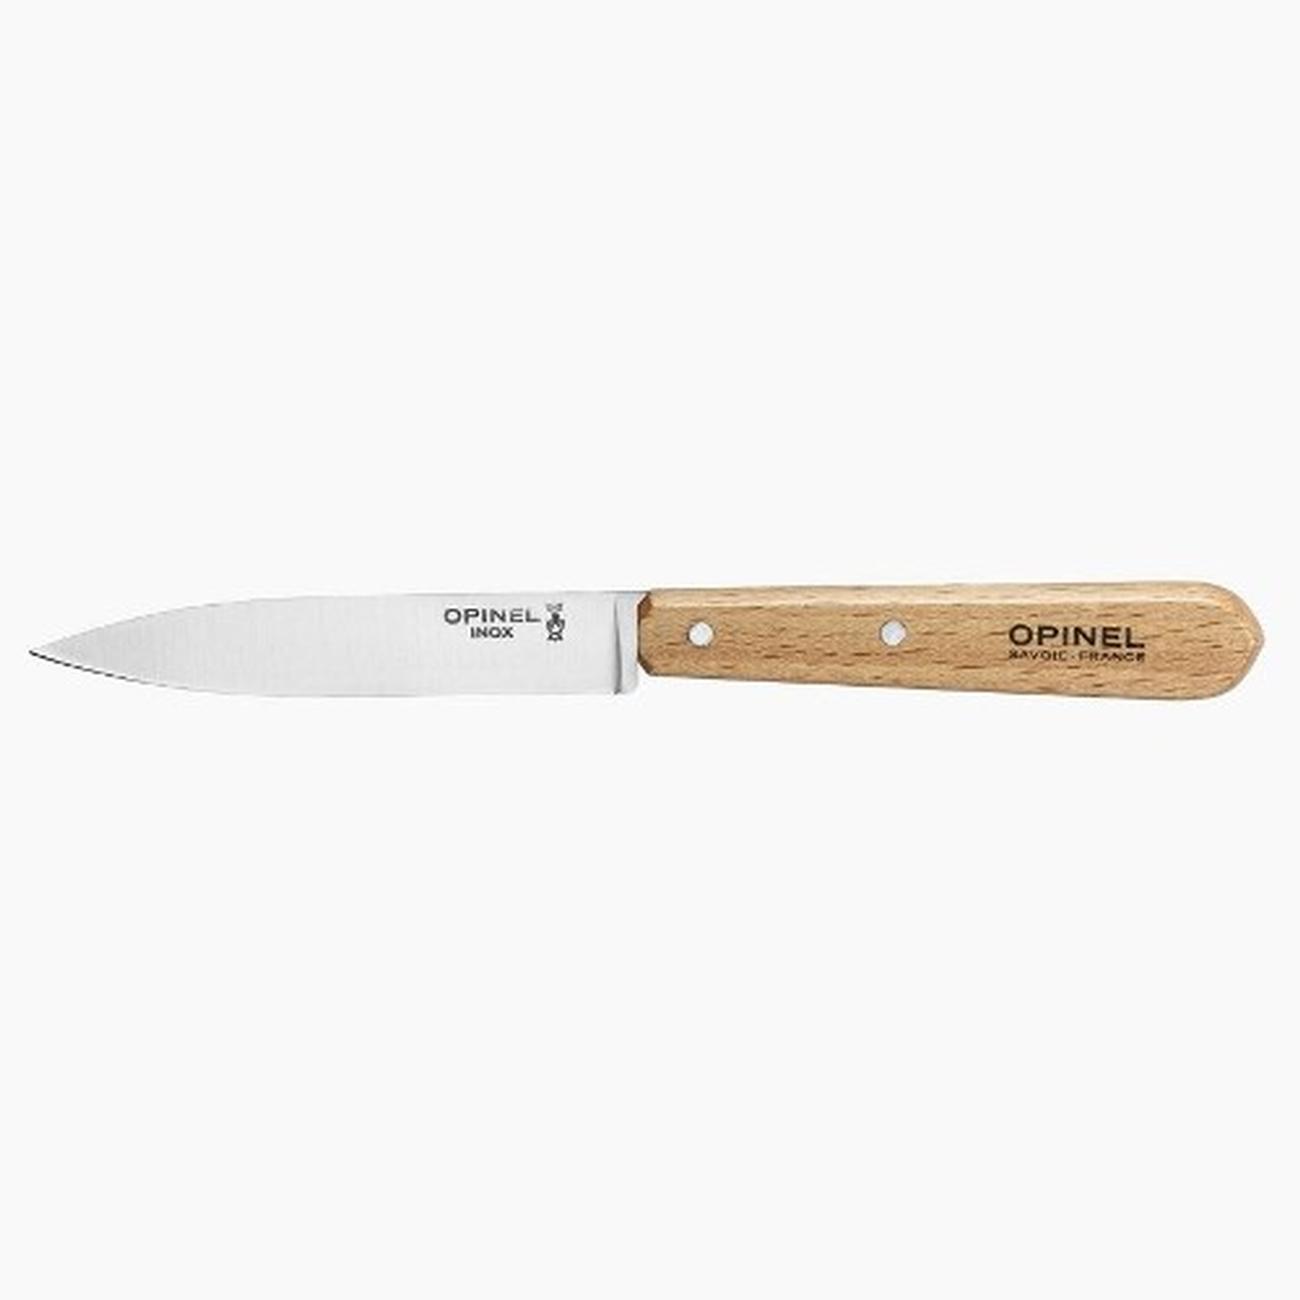 https://www.thekitchenwhisk.ie/contentfiles/productImages/Large/1684498211630_opinel-paring-knife-no112-natural.jpg